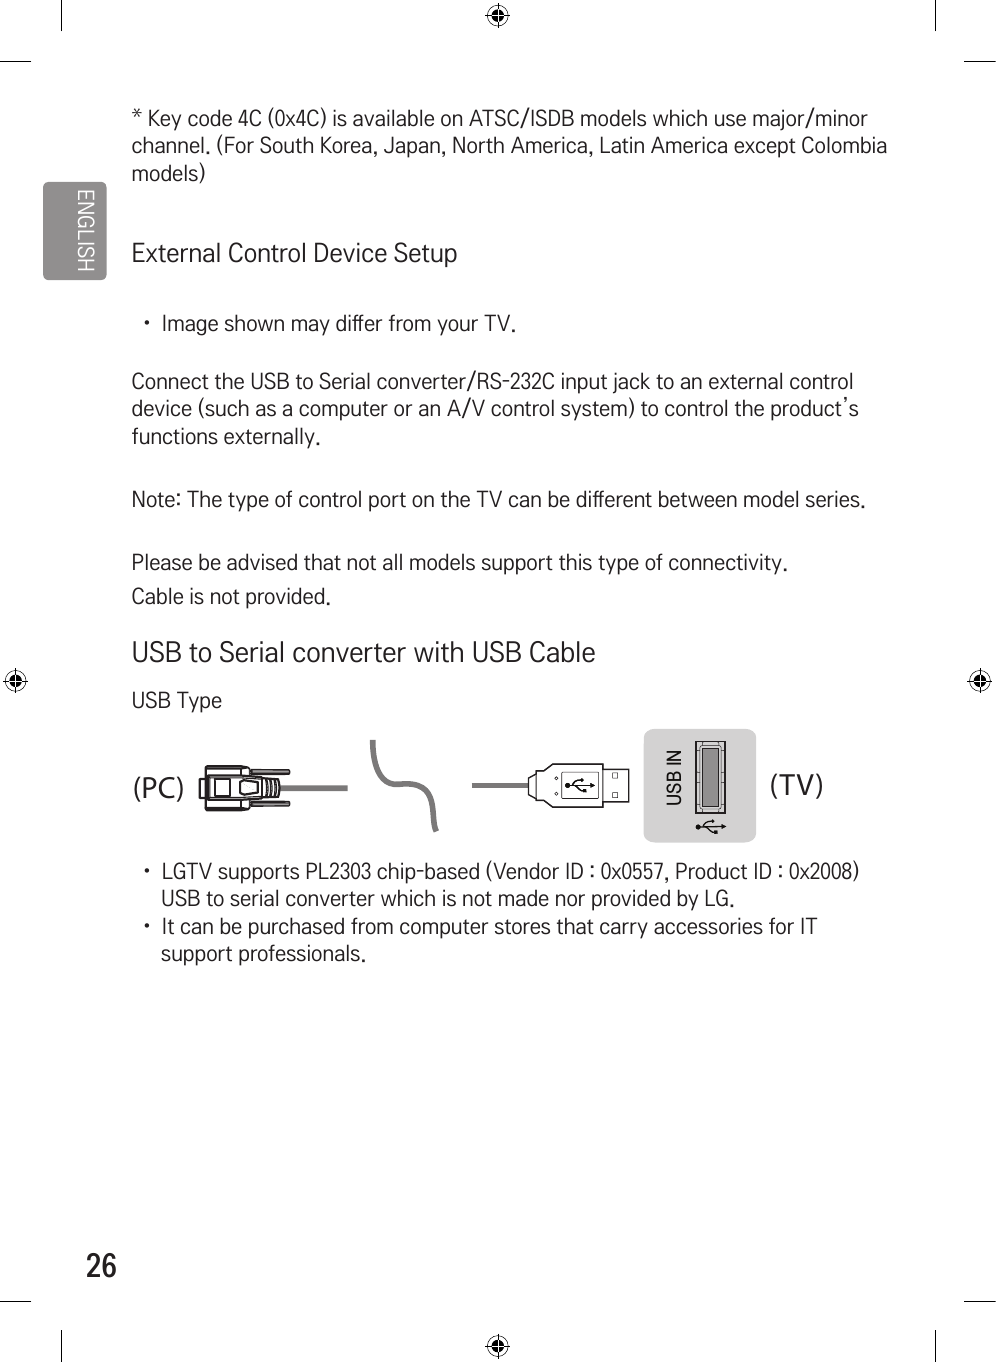 ENGLISH26* Key code 4C (0x4C) is available on ATSC/ISDB models which use major/minor channel. (For South Korea, Japan, North America, Latin America except Colombia models)External Control Device Setup •  Image shown may di󷕔er from your TV.Connect the USB to Serial converter/RS-232C input jack to an external control device (such as a computer or an A/V control system) to control the product’s functions externally.Note: The type of control port on the TV can be di󷕔erent between model series.Please be advised that not all models support this type of connectivity.Cable is not provided.USB to Serial converter with USB CableUSB TypeUSB IN(TV)(PC)(PC)RS-232C IN(CONTROL &amp; SERVICE)(TV)(TV)(PC)(TV)(PC)SERVICE ONLYRS-232C IN(CONTROL &amp; SERVICE)RS-232C IN(CONTROL &amp; SERVICE)132132•  LGTV supports PL2303 chip-based (Vendor ID : 0x0557, Product ID : 0x2008) USB to serial converter which is not made nor provided by LG.•  It can be purchased from computer stores that carry accessories for IT support professionals.